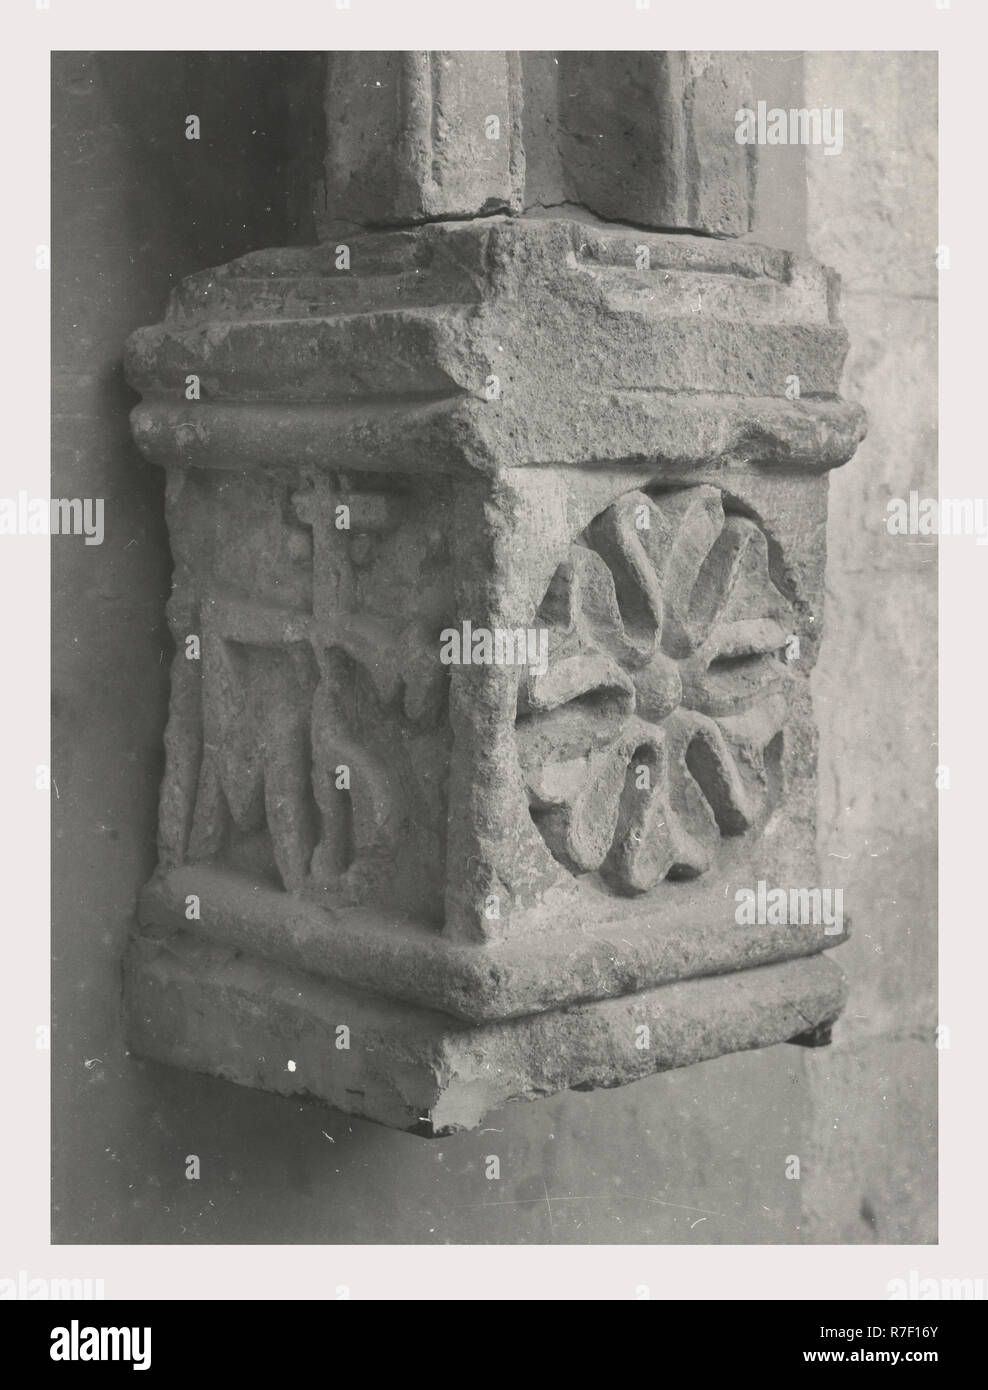 Marches Macerata San Severino Marche Museo Archeologico, this is my Italy, the italian country of visual history, Antiquities Interior views of Roman spolia, gravestones, an altar and architectural fragments. The Museo Archeologico is dedicated to Giuseppe Moretti. Stock Photo